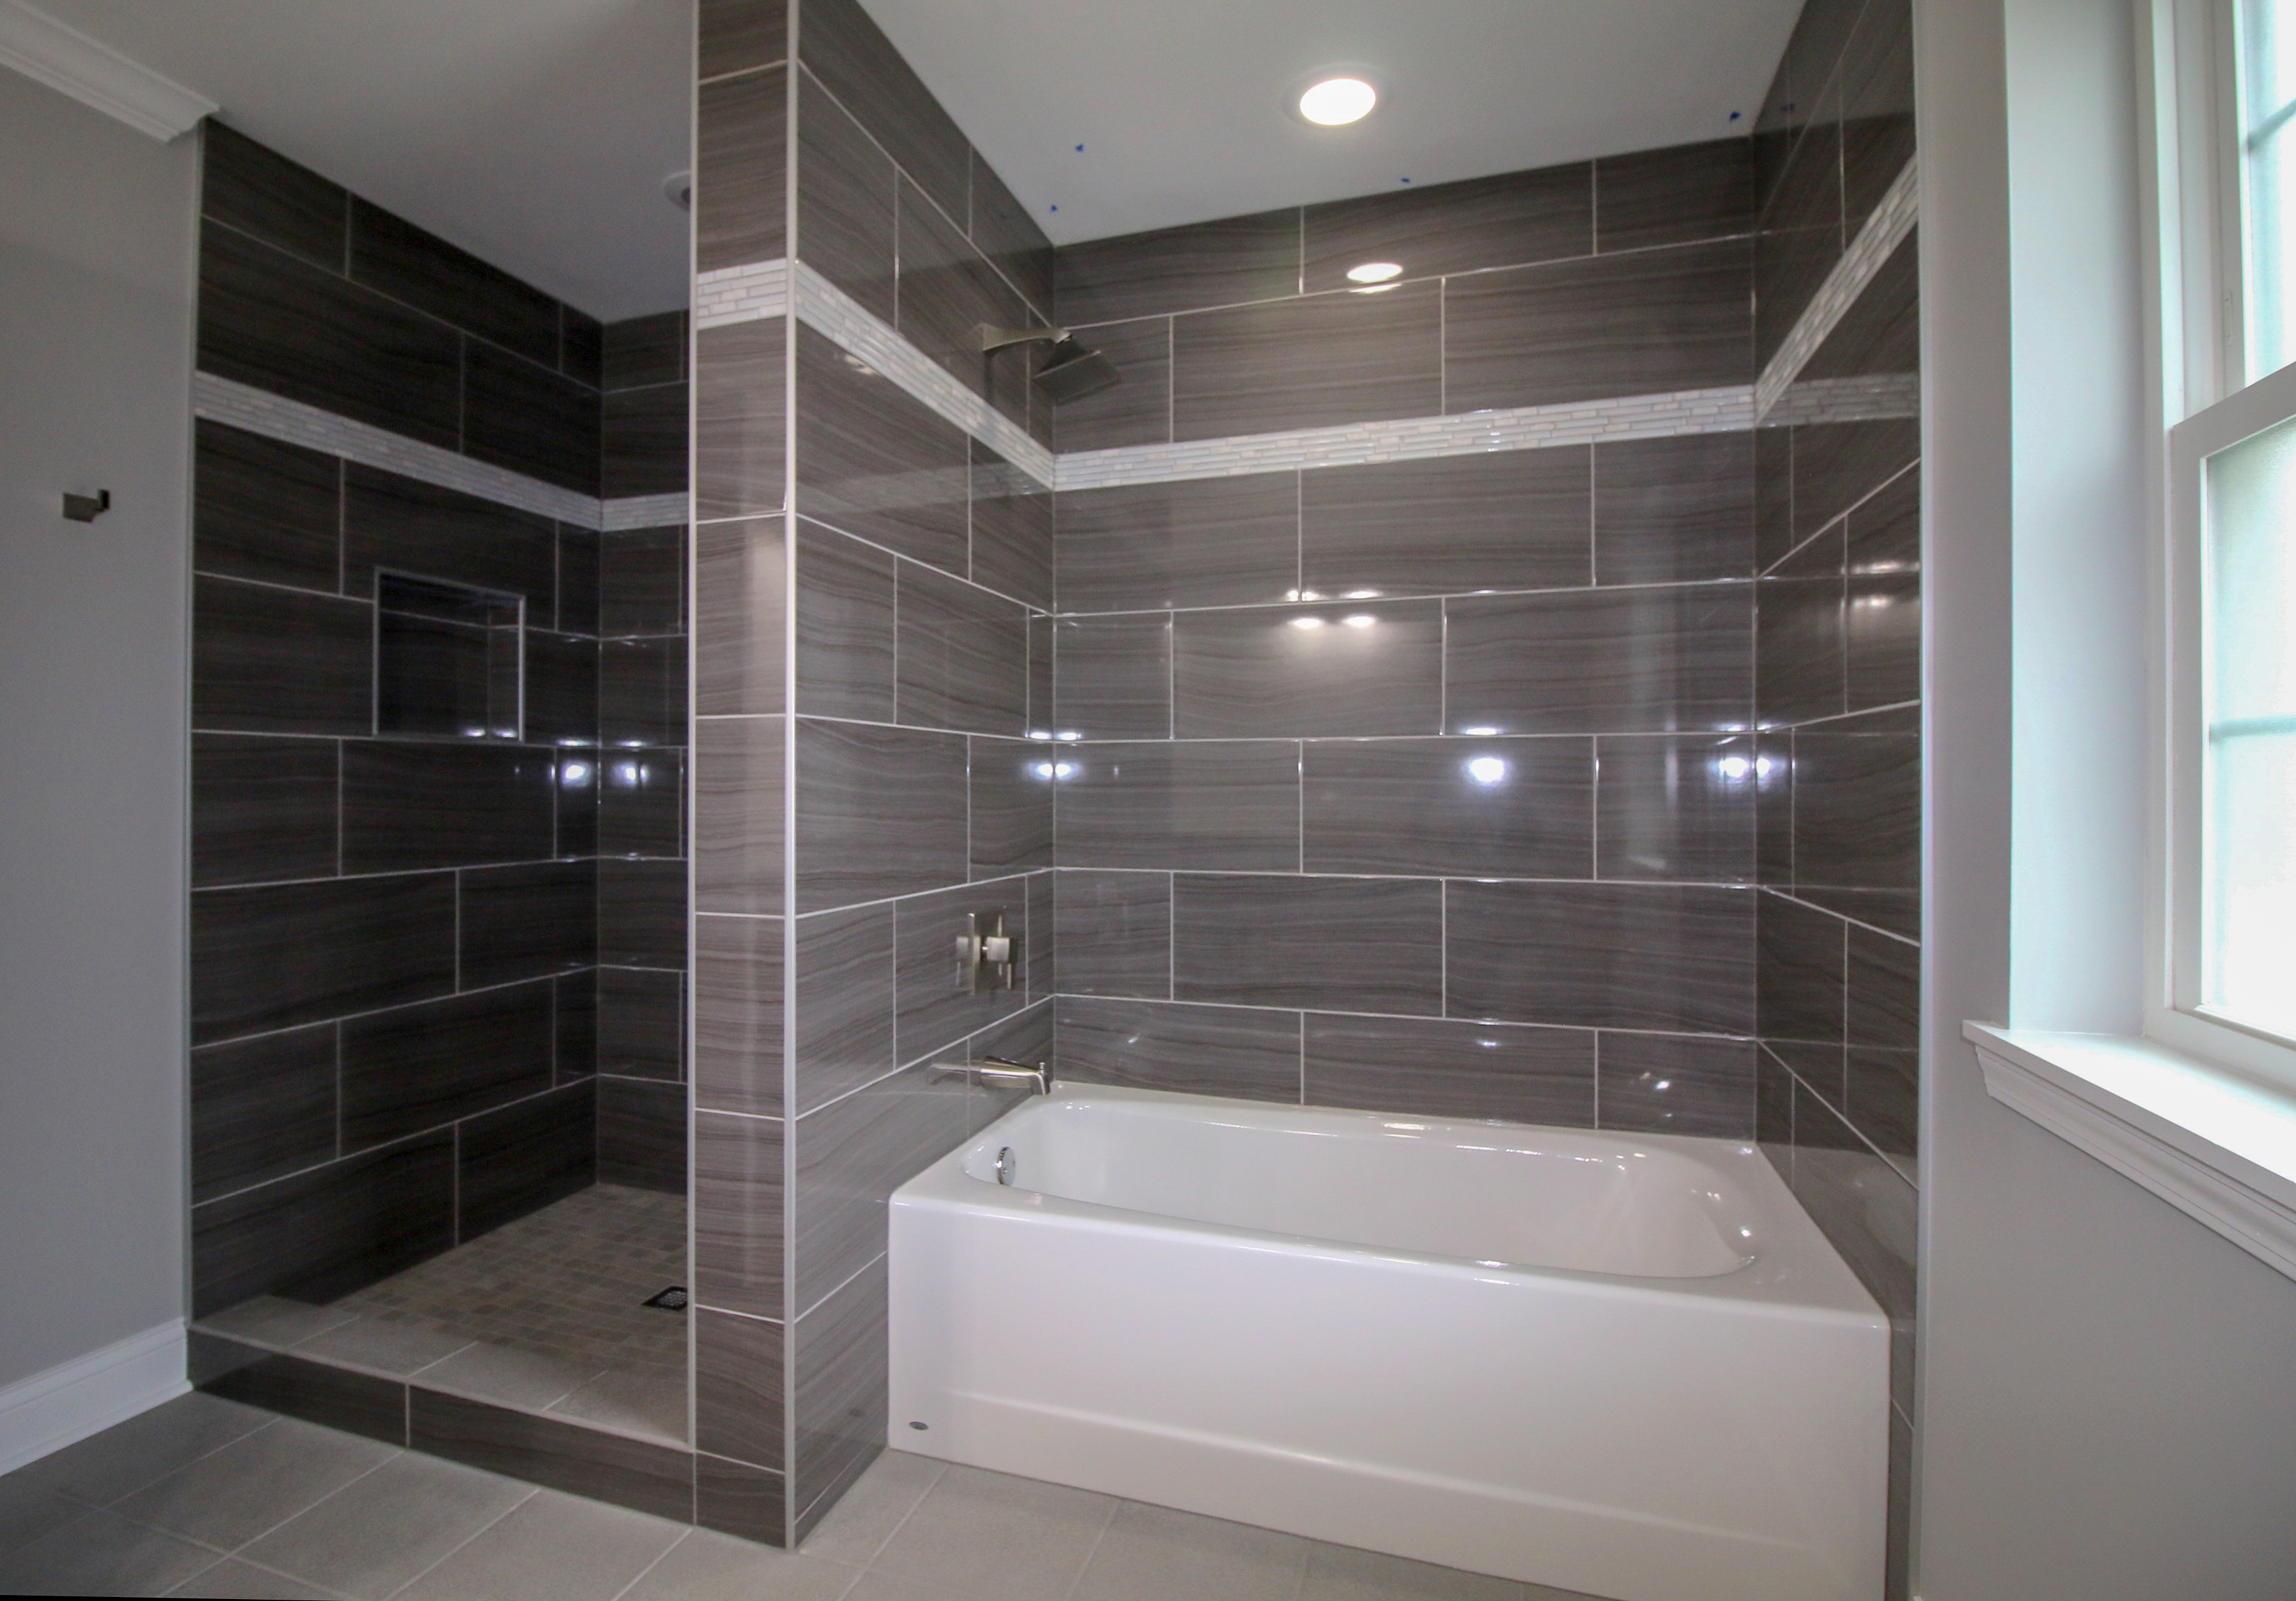 Bathroom Update with Elegant Tub Surround and Standing Shower